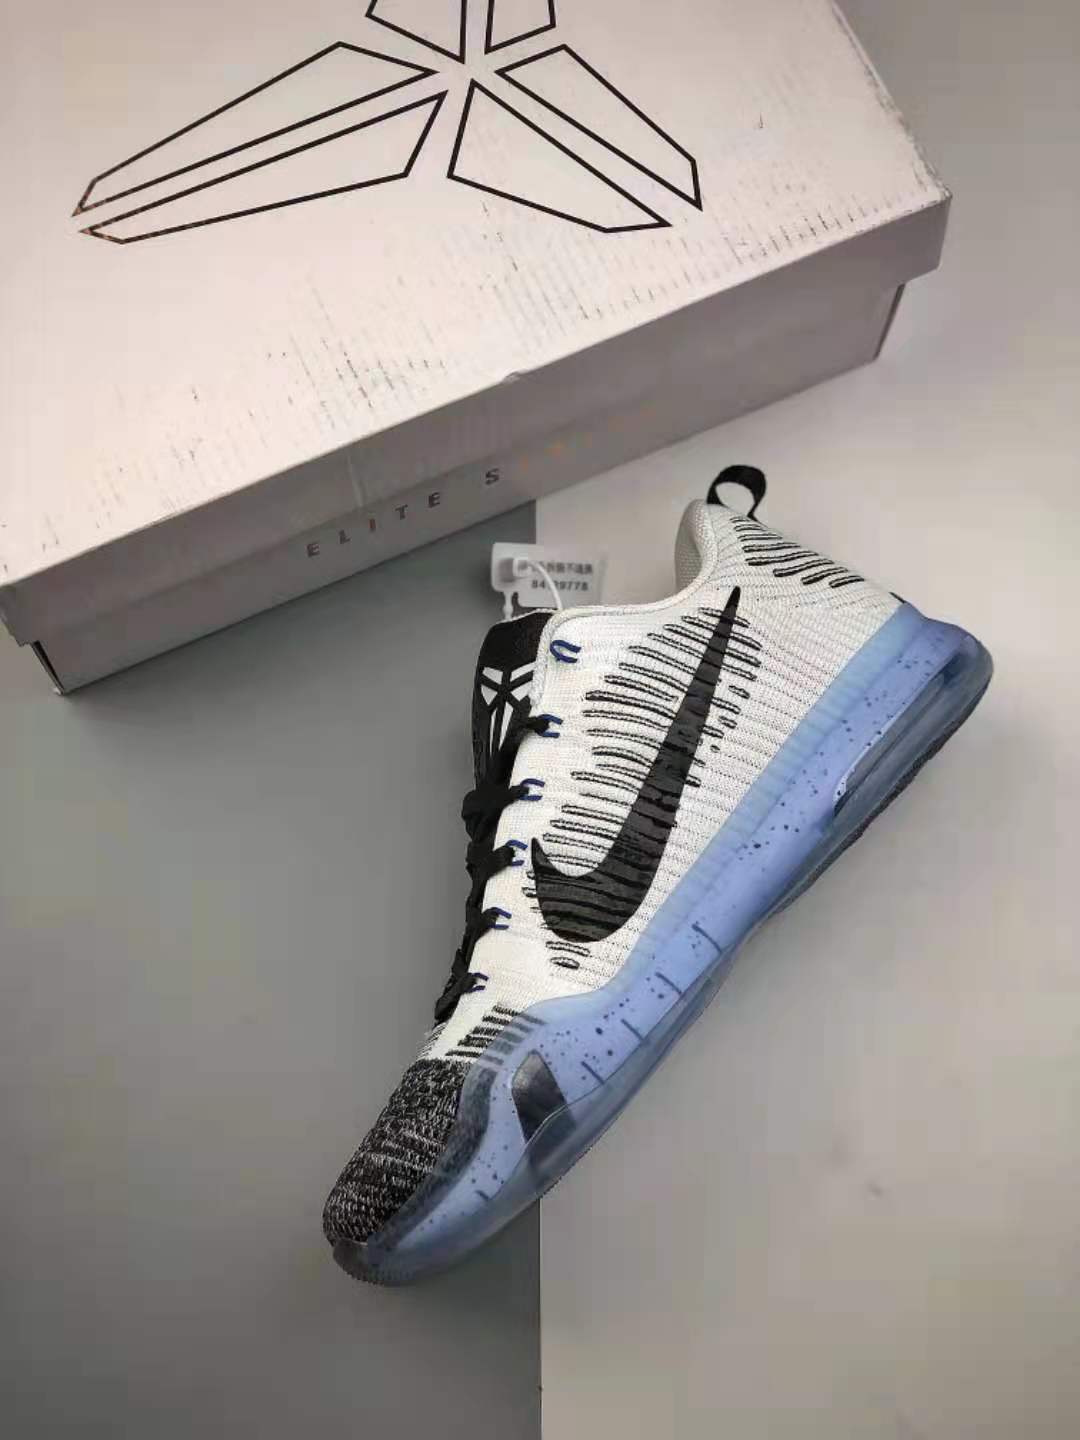 Kobe 10 Elite Low Prm Htm Shark Jaw White Black 805937-101 - Stylish and High-performance Basketball Sneakers